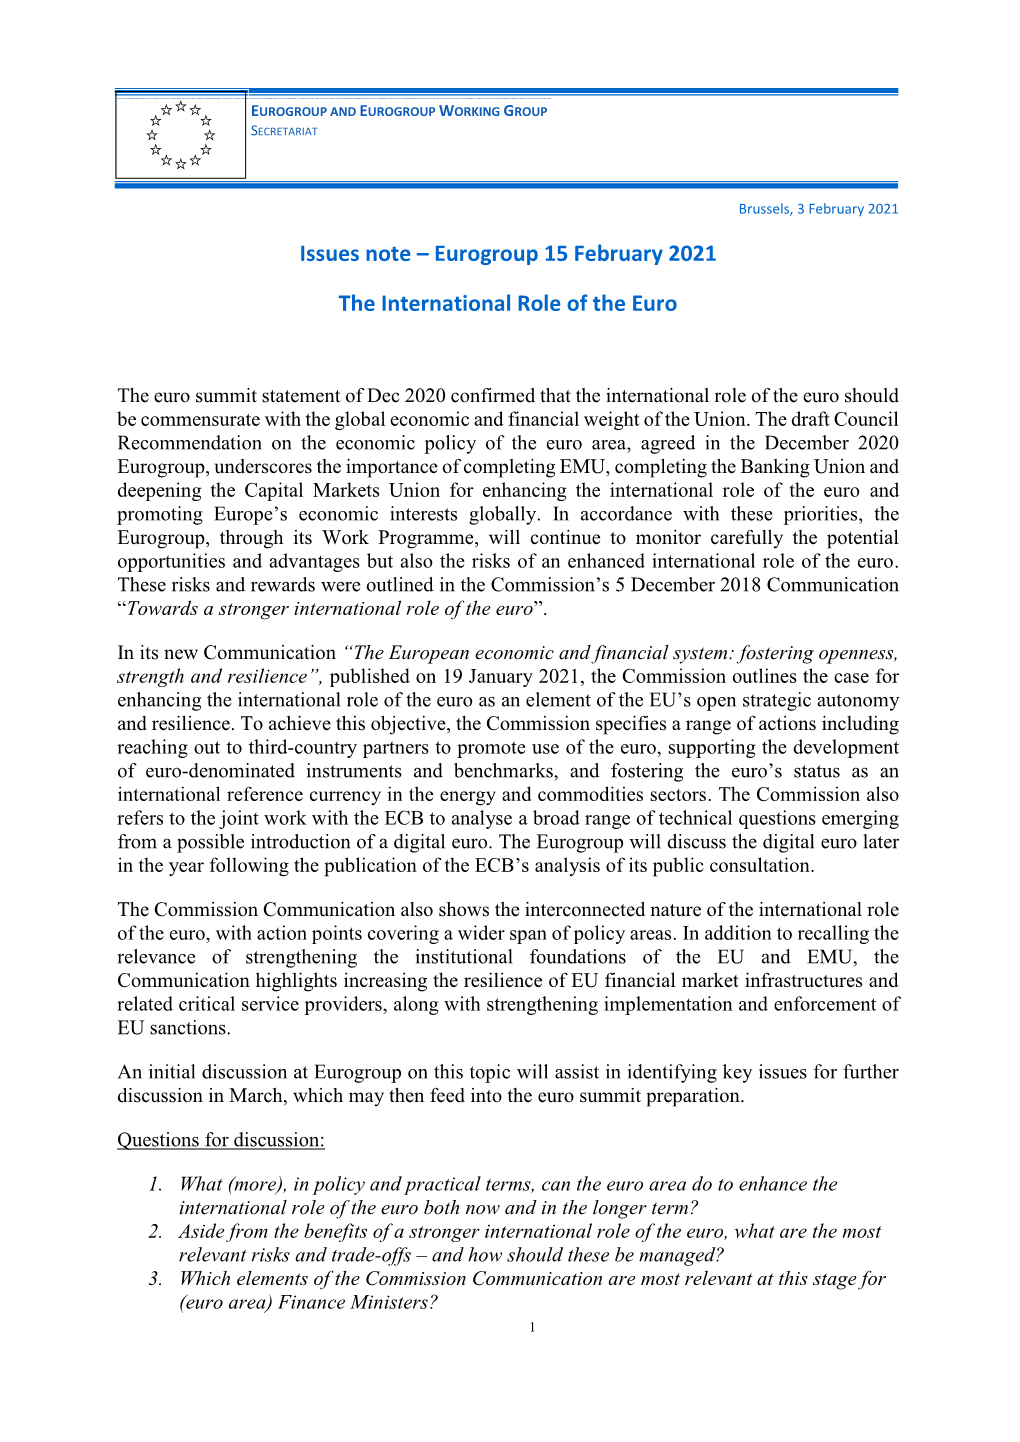 Issues Note – Eurogroup 15 February 2021 the International Role of the Euro